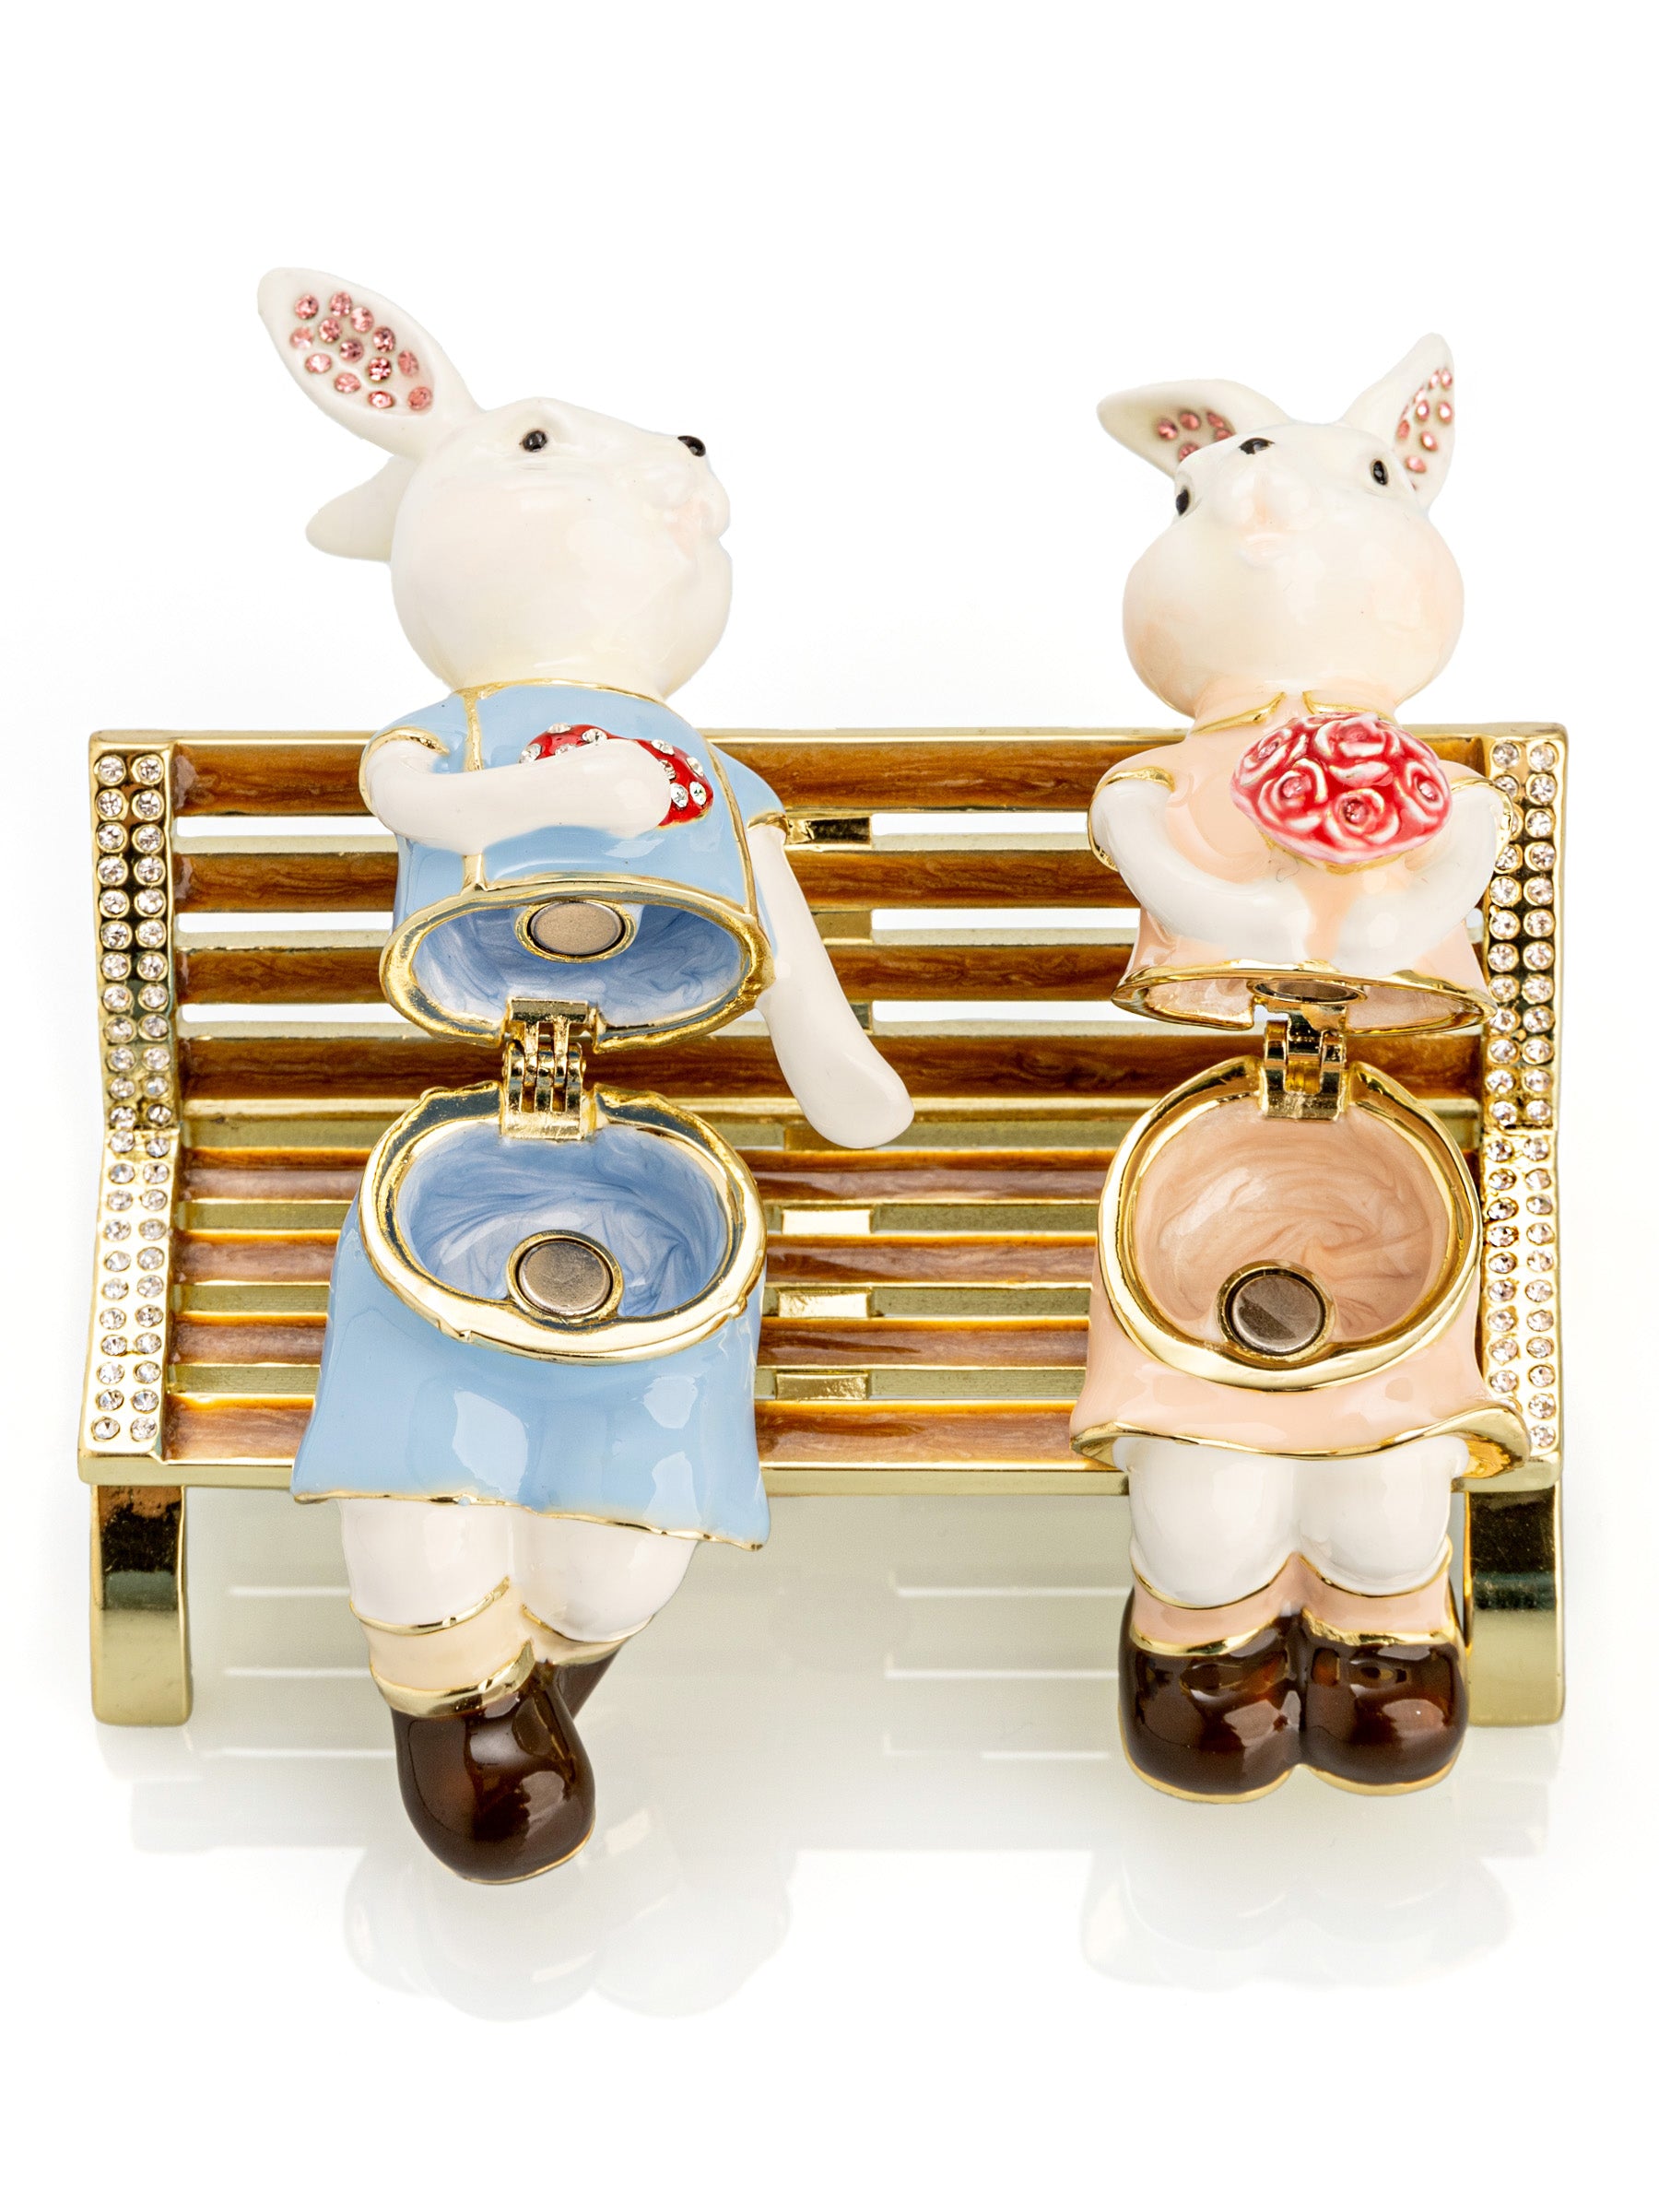 2 bunnies in love sitting on a bench, valentine flowers and chocolates